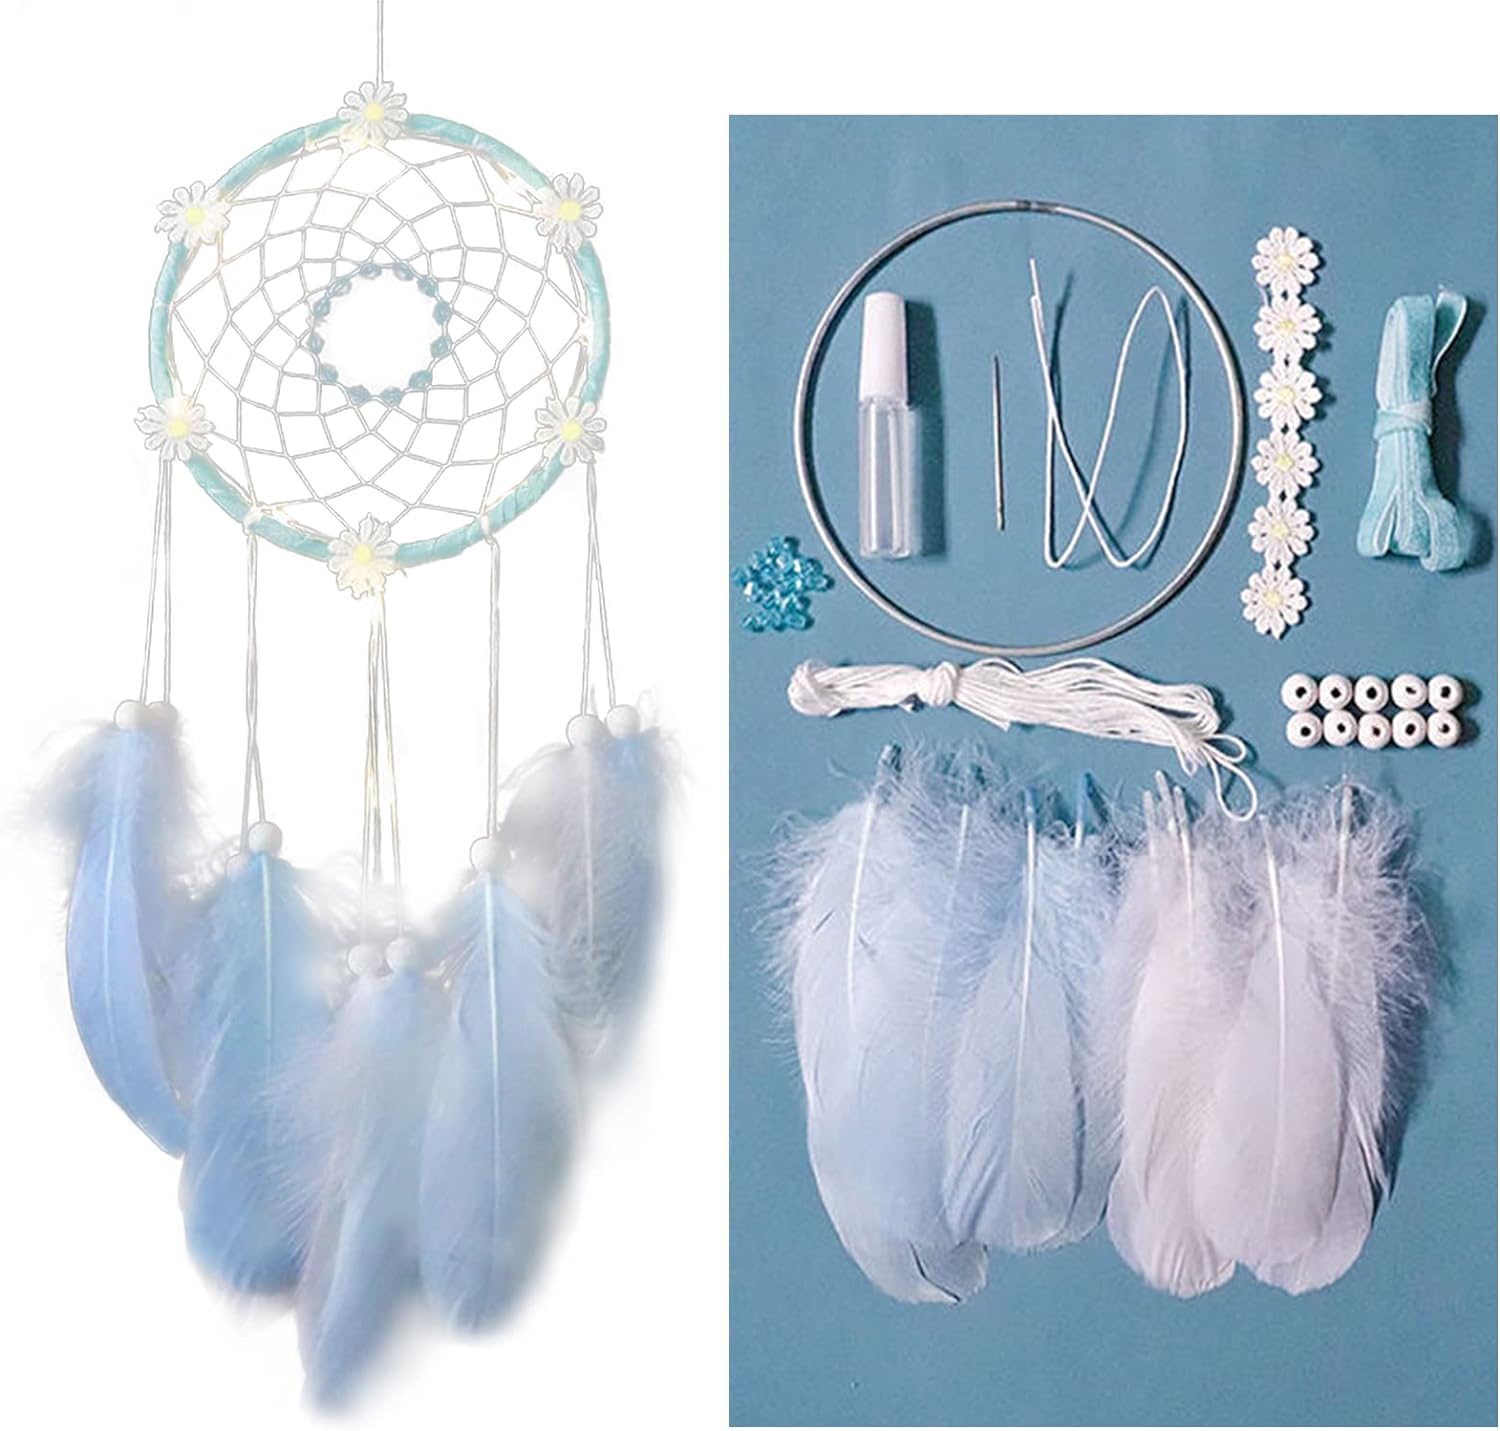 ZYNQACC DIY Dream Catcher Kit,Daisy Dream Catcher Craft Kit,Handmade Feather Dream Catcher Bedroom Wall Hanging Decor Perfect DIY Birthday Gift Box Suitable for Adults & Teens (Blue)